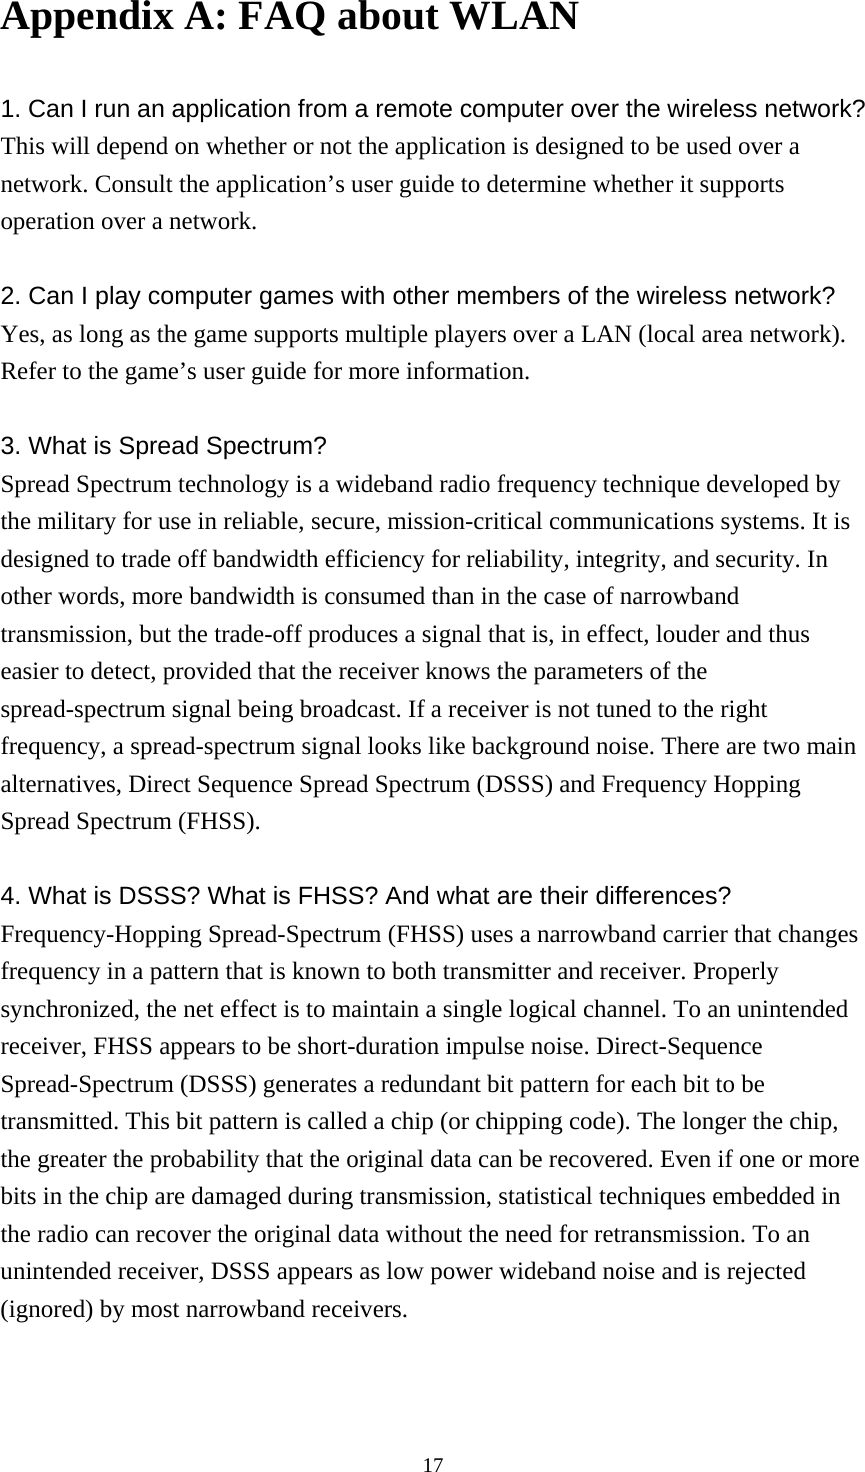  17Appendix A: FAQ about WLAN  1. Can I run an application from a remote computer over the wireless network? This will depend on whether or not the application is designed to be used over a network. Consult the application’s user guide to determine whether it supports operation over a network.  2. Can I play computer games with other members of the wireless network? Yes, as long as the game supports multiple players over a LAN (local area network). Refer to the game’s user guide for more information.  3. What is Spread Spectrum? Spread Spectrum technology is a wideband radio frequency technique developed by the military for use in reliable, secure, mission-critical communications systems. It is designed to trade off bandwidth efficiency for reliability, integrity, and security. In other words, more bandwidth is consumed than in the case of narrowband transmission, but the trade-off produces a signal that is, in effect, louder and thus easier to detect, provided that the receiver knows the parameters of the spread-spectrum signal being broadcast. If a receiver is not tuned to the right frequency, a spread-spectrum signal looks like background noise. There are two main alternatives, Direct Sequence Spread Spectrum (DSSS) and Frequency Hopping Spread Spectrum (FHSS).  4. What is DSSS? What is FHSS? And what are their differences? Frequency-Hopping Spread-Spectrum (FHSS) uses a narrowband carrier that changes frequency in a pattern that is known to both transmitter and receiver. Properly synchronized, the net effect is to maintain a single logical channel. To an unintended receiver, FHSS appears to be short-duration impulse noise. Direct-Sequence Spread-Spectrum (DSSS) generates a redundant bit pattern for each bit to be transmitted. This bit pattern is called a chip (or chipping code). The longer the chip, the greater the probability that the original data can be recovered. Even if one or more bits in the chip are damaged during transmission, statistical techniques embedded in the radio can recover the original data without the need for retransmission. To an unintended receiver, DSSS appears as low power wideband noise and is rejected (ignored) by most narrowband receivers.  